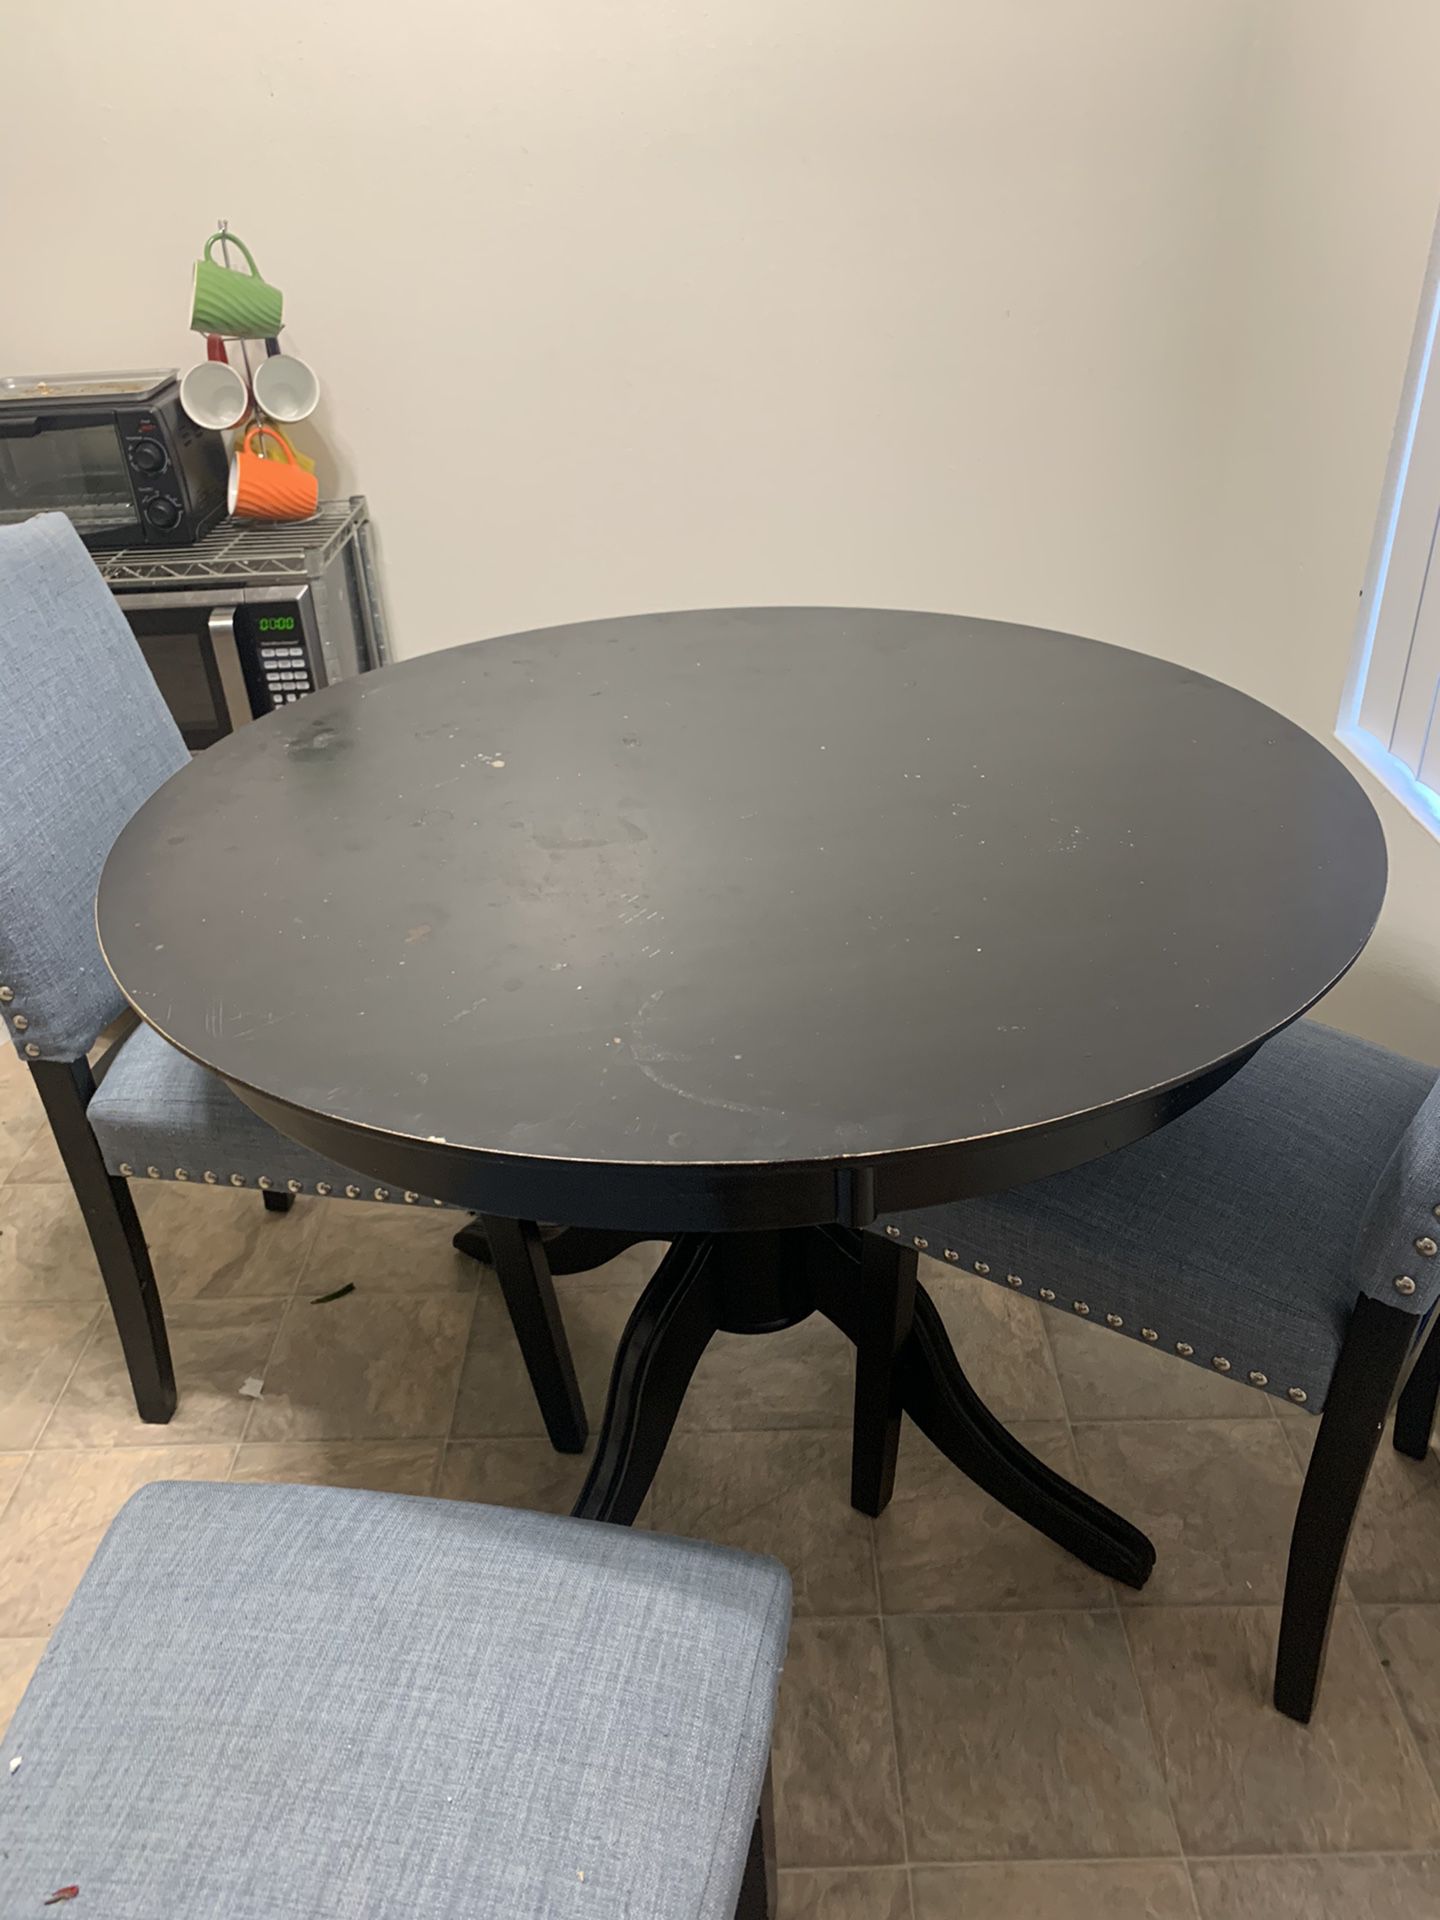 Round dining table & chairs